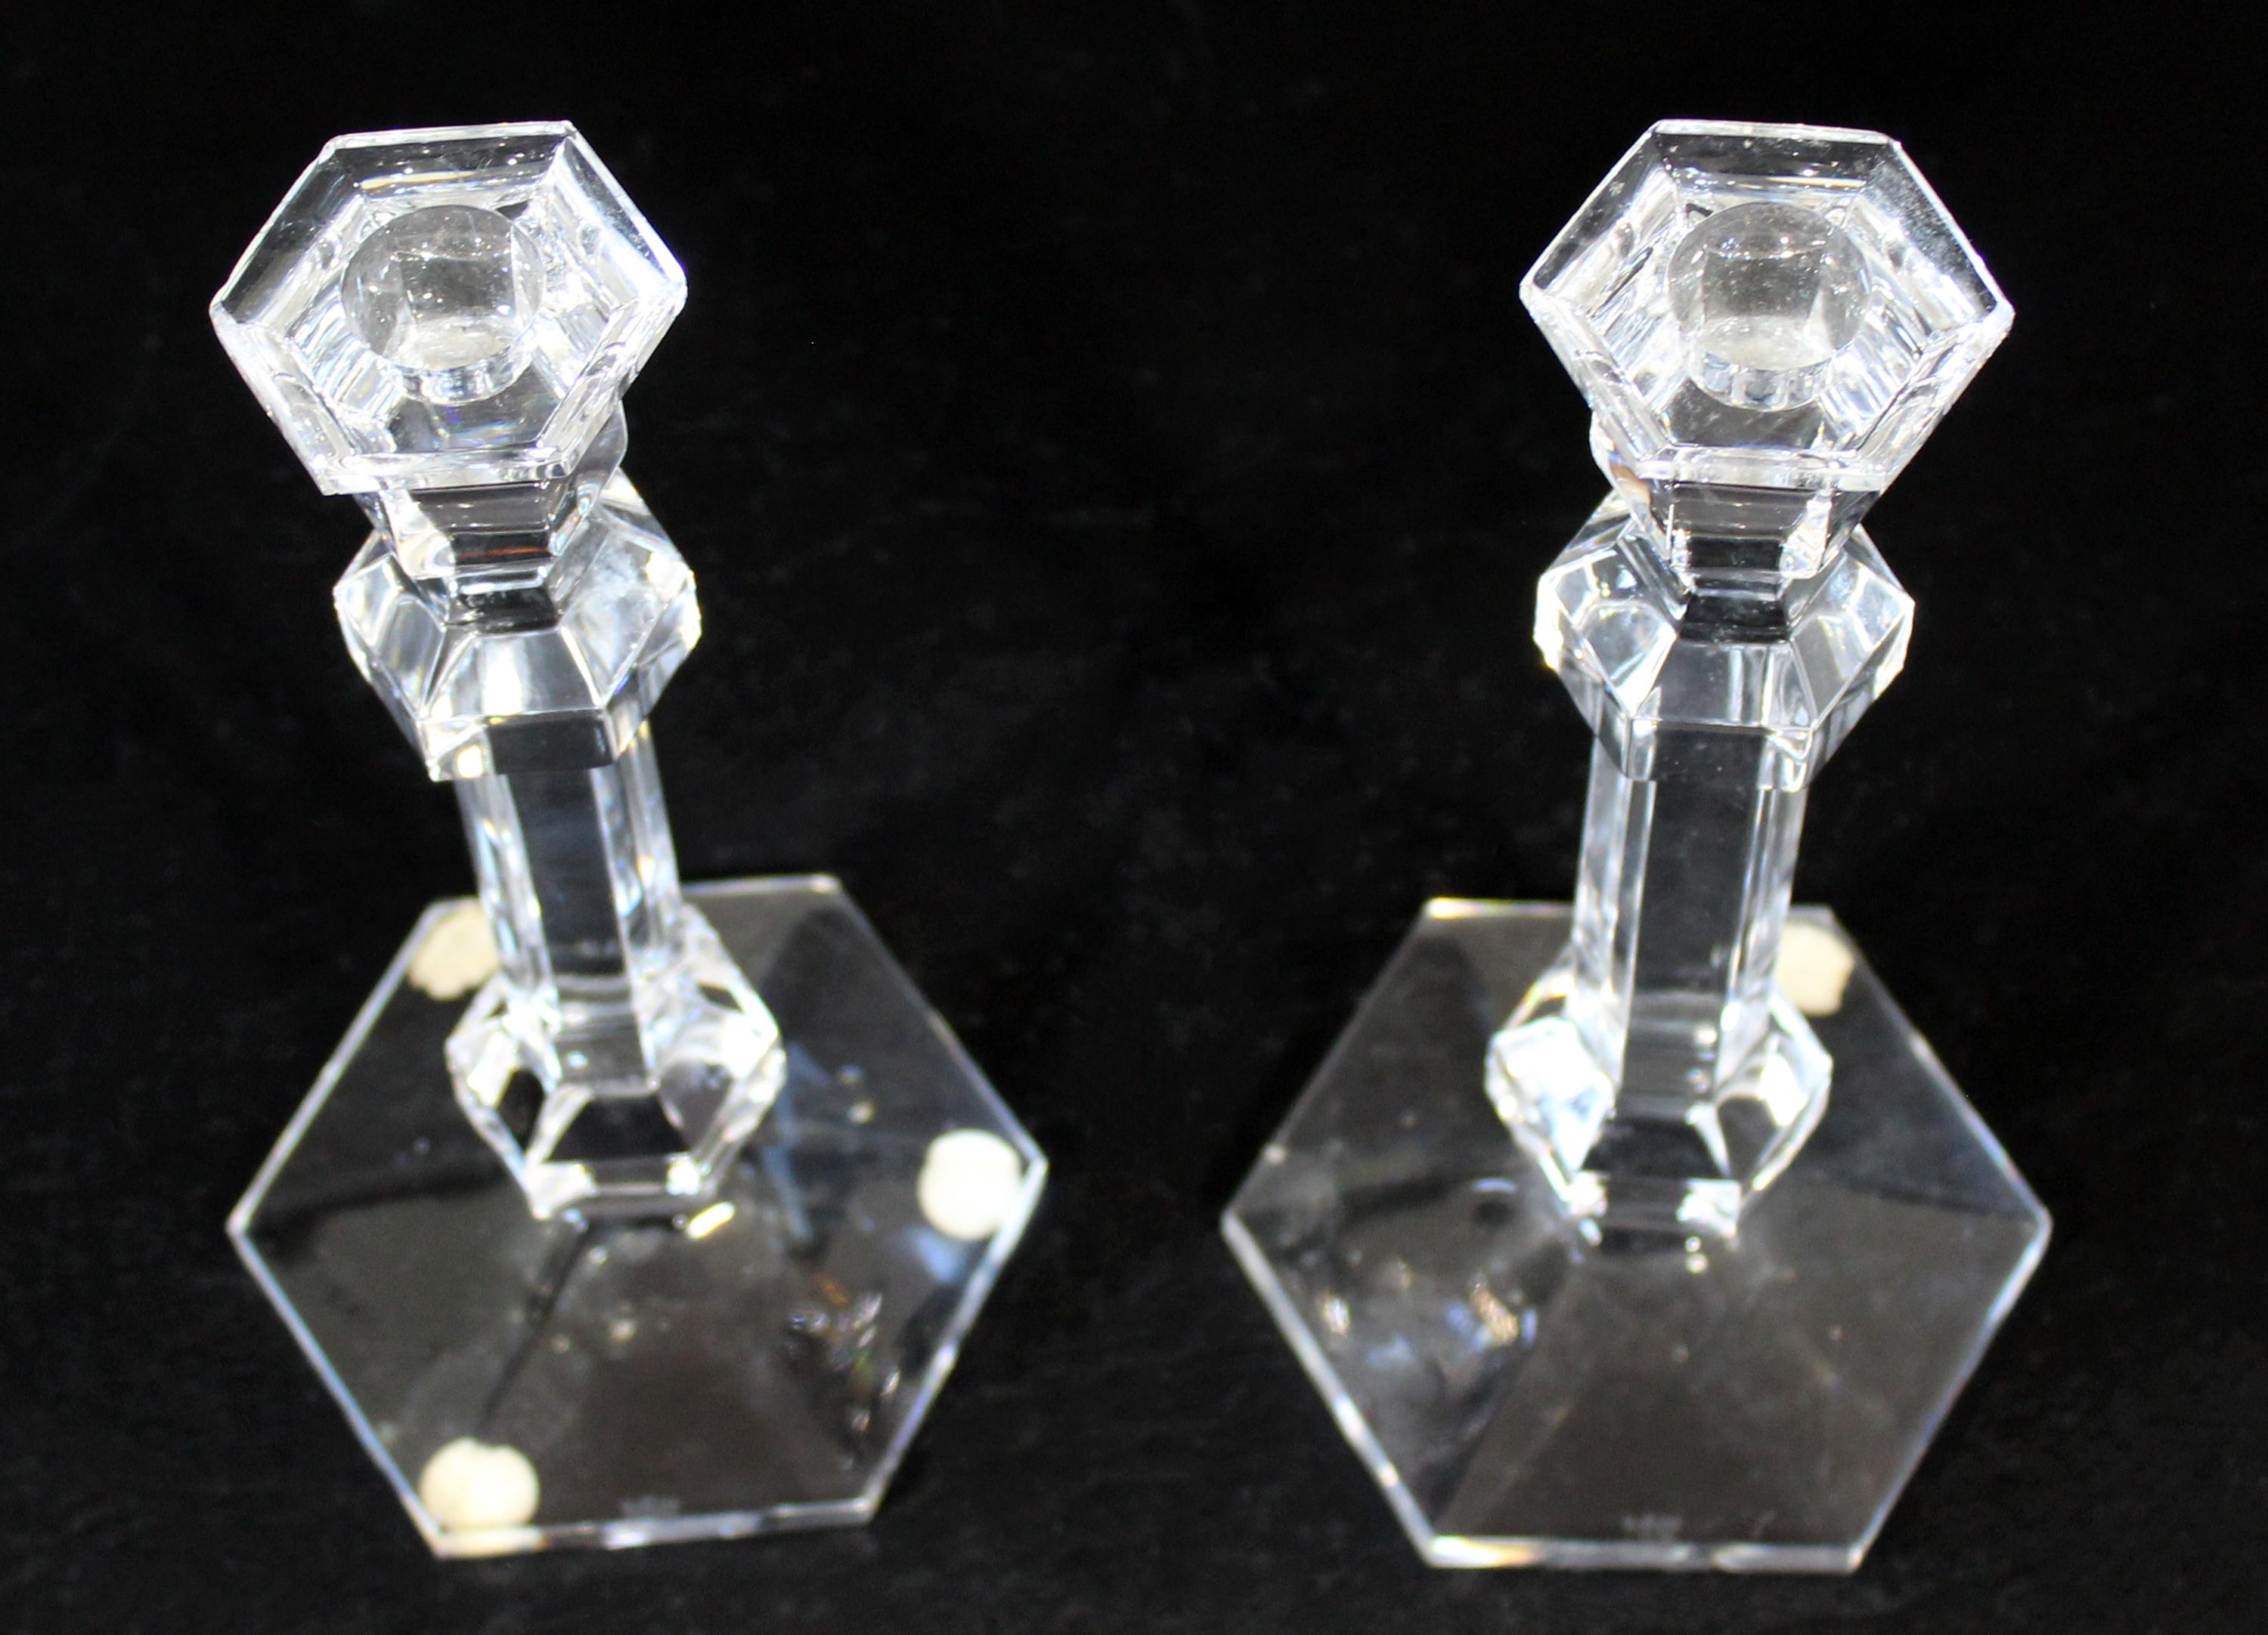 For your consideration is a fantastic pair of crystal candlesticks, signed by Val St. Lambert. In excellent condition. The dimensions are 4.5